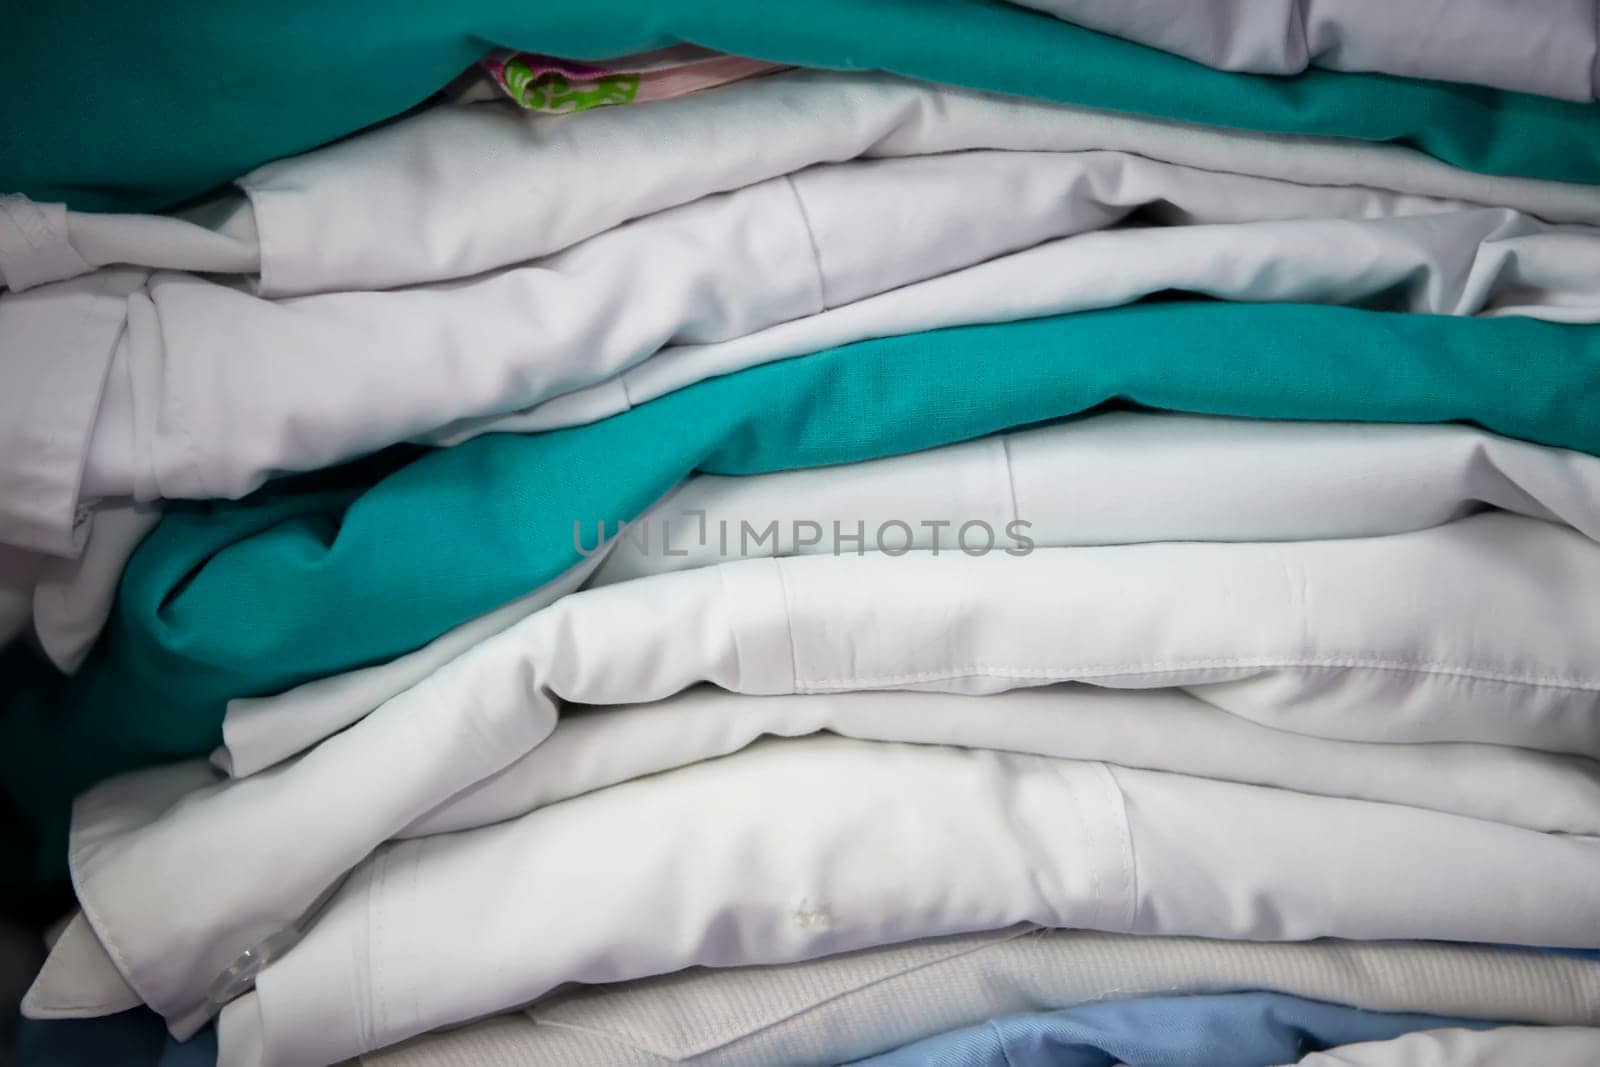 White and green medical gowns are stacked.